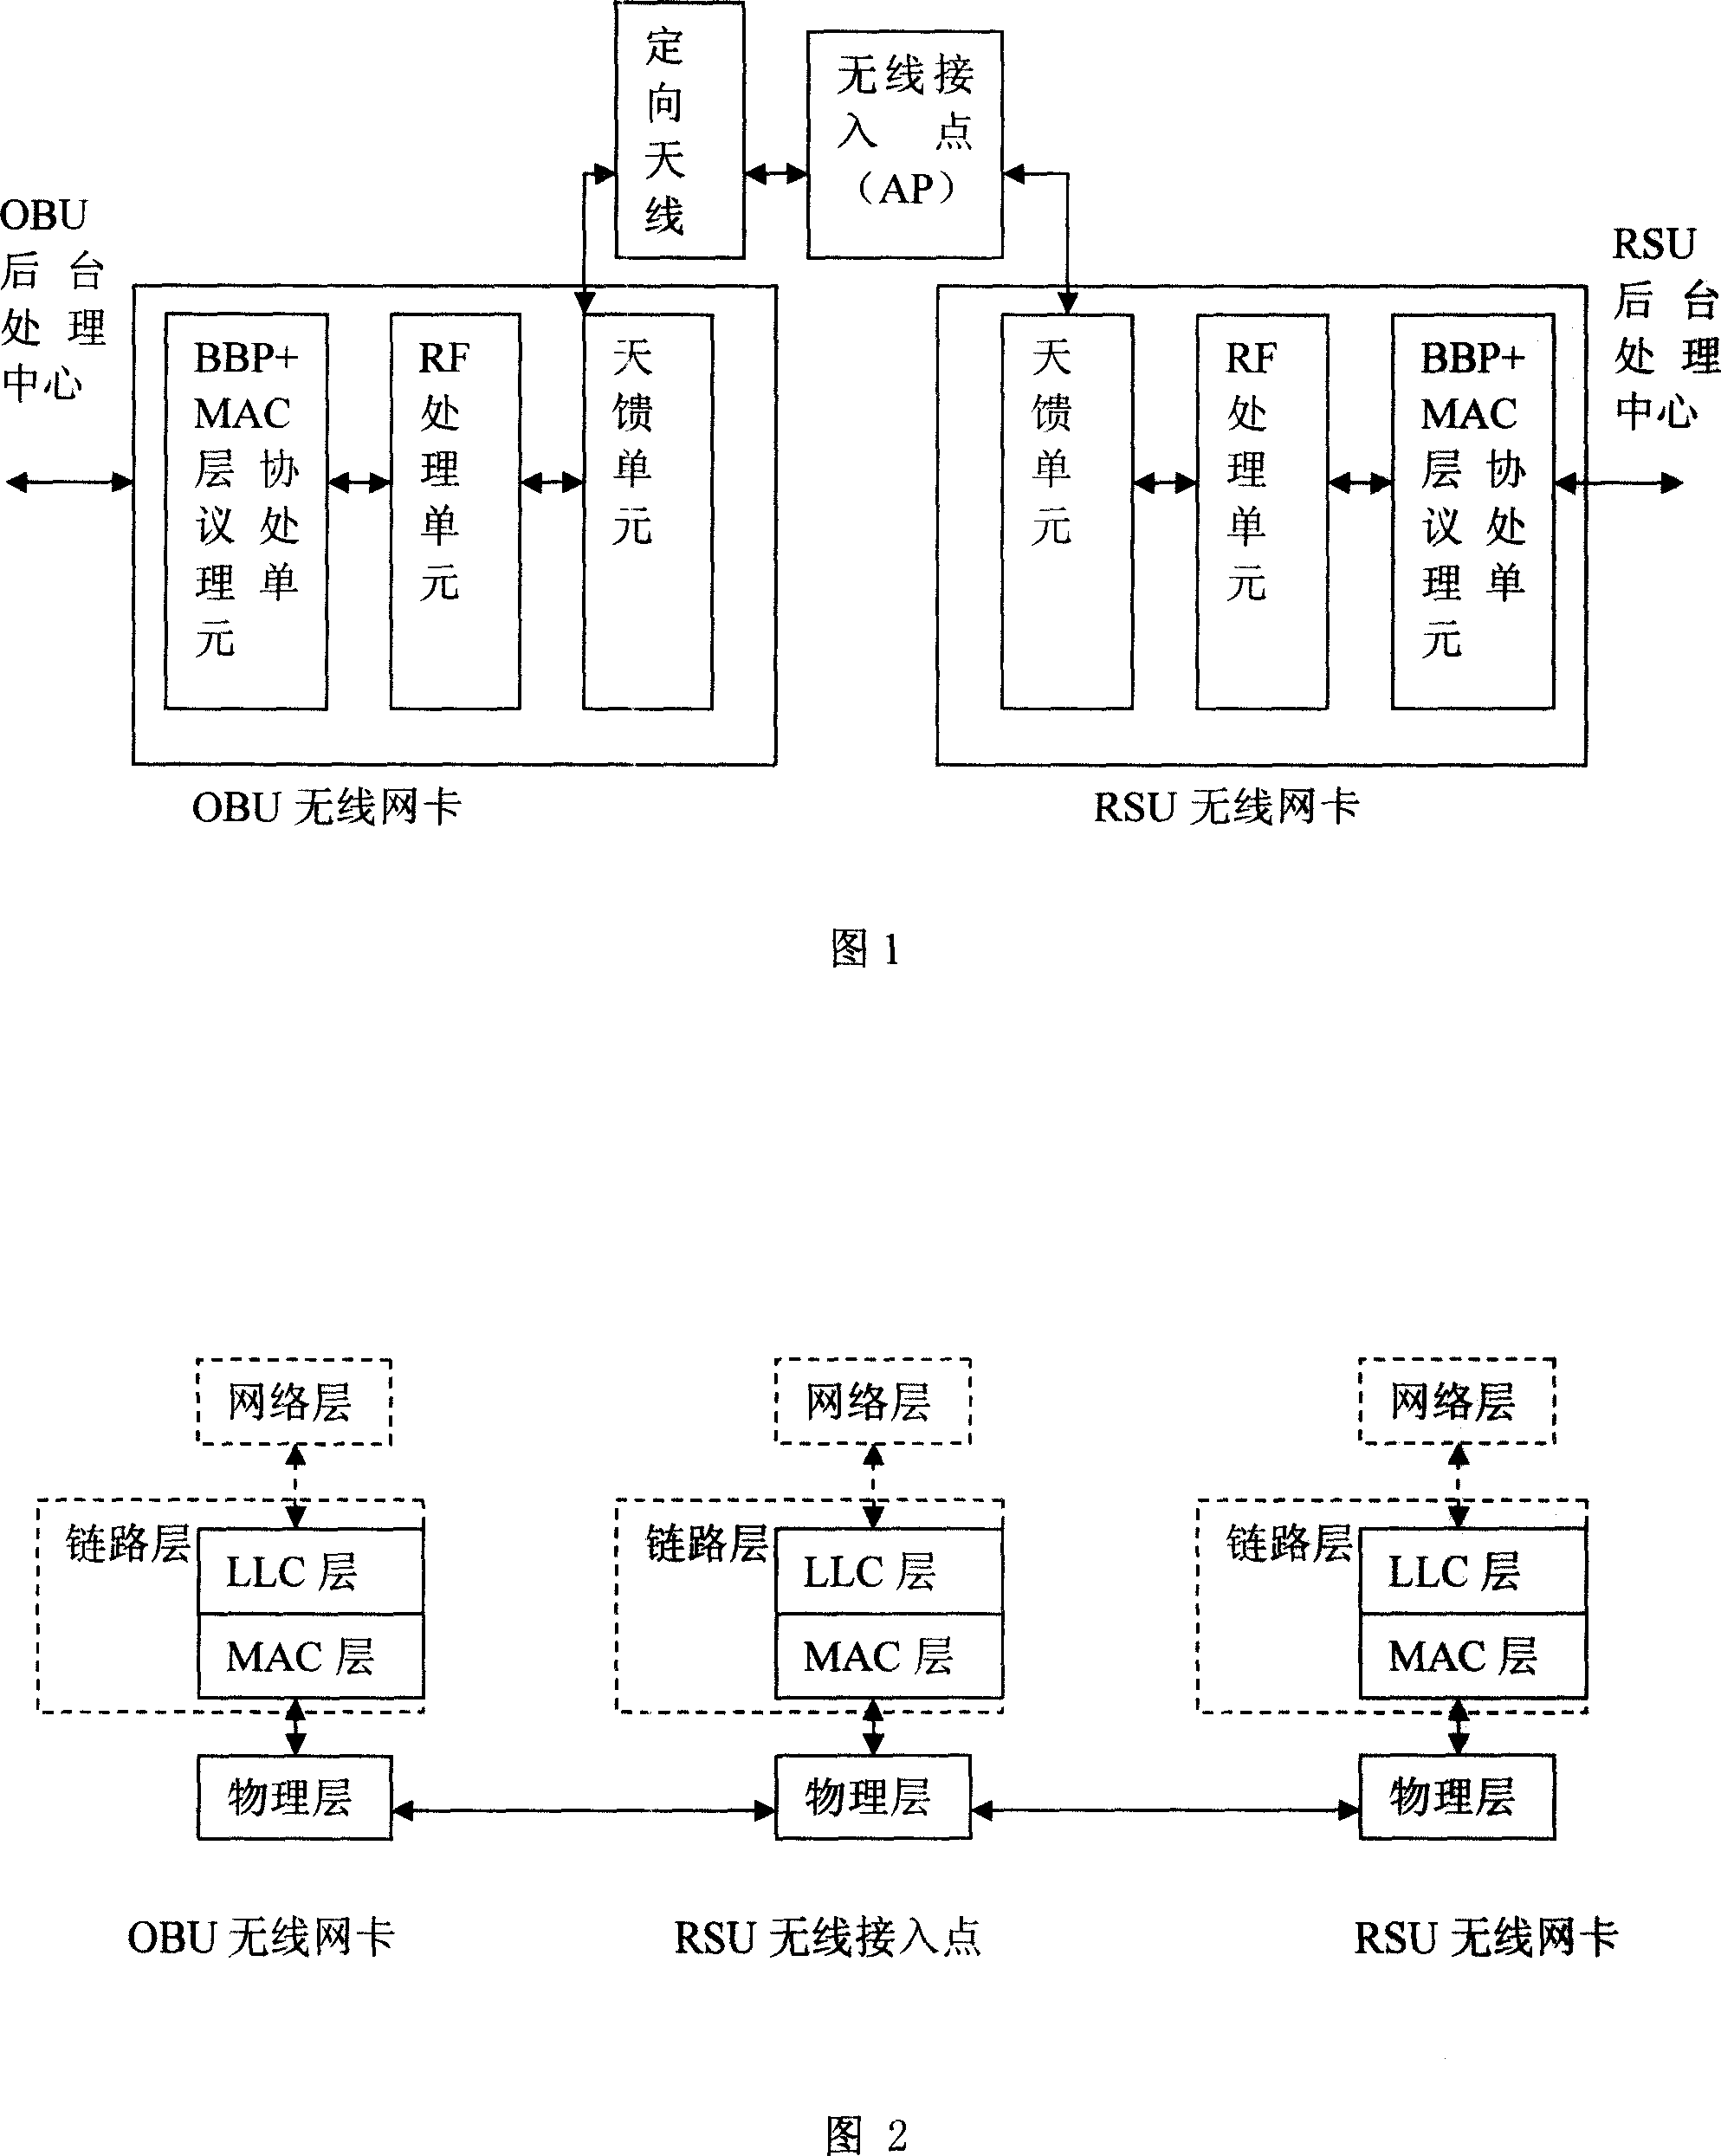 Communication method for onboard units and byroad units of ETC system based on WLAN